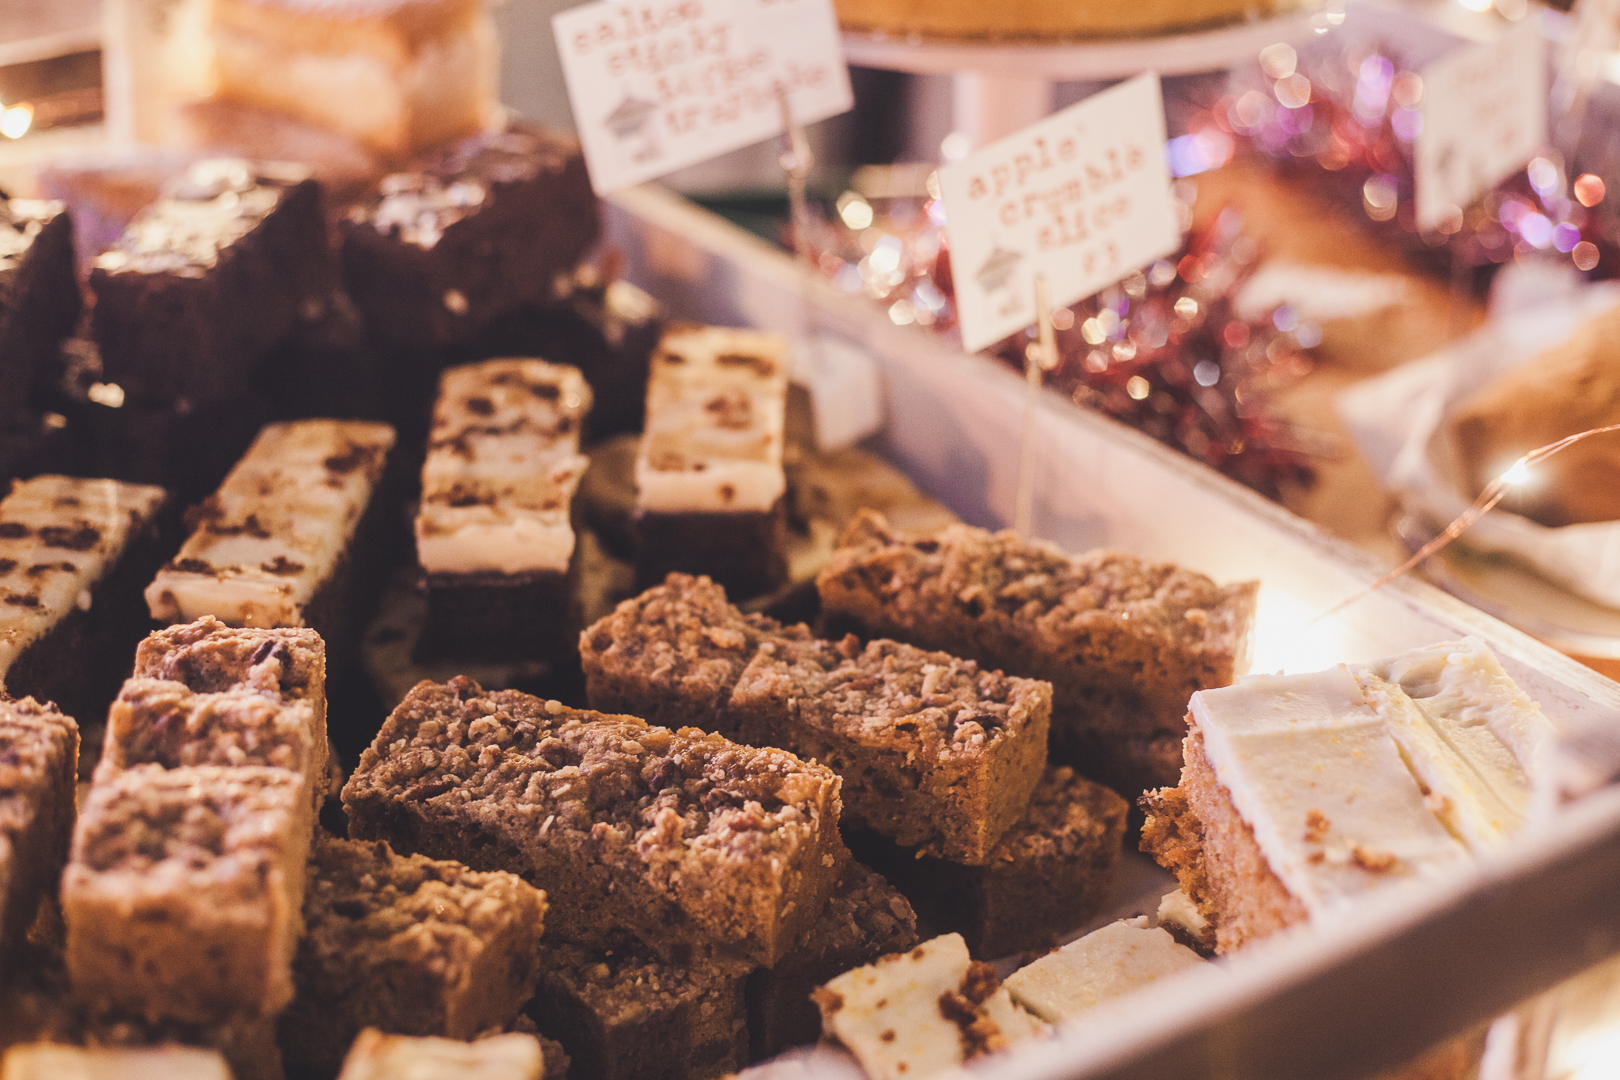 When it comes to quick, delicious street food, nothing beats a proper food market! The Big Feed Street Food Market in Glasgow gathers the best street food vendors from around Scotland and many of the stalls have delicious vegan options available!